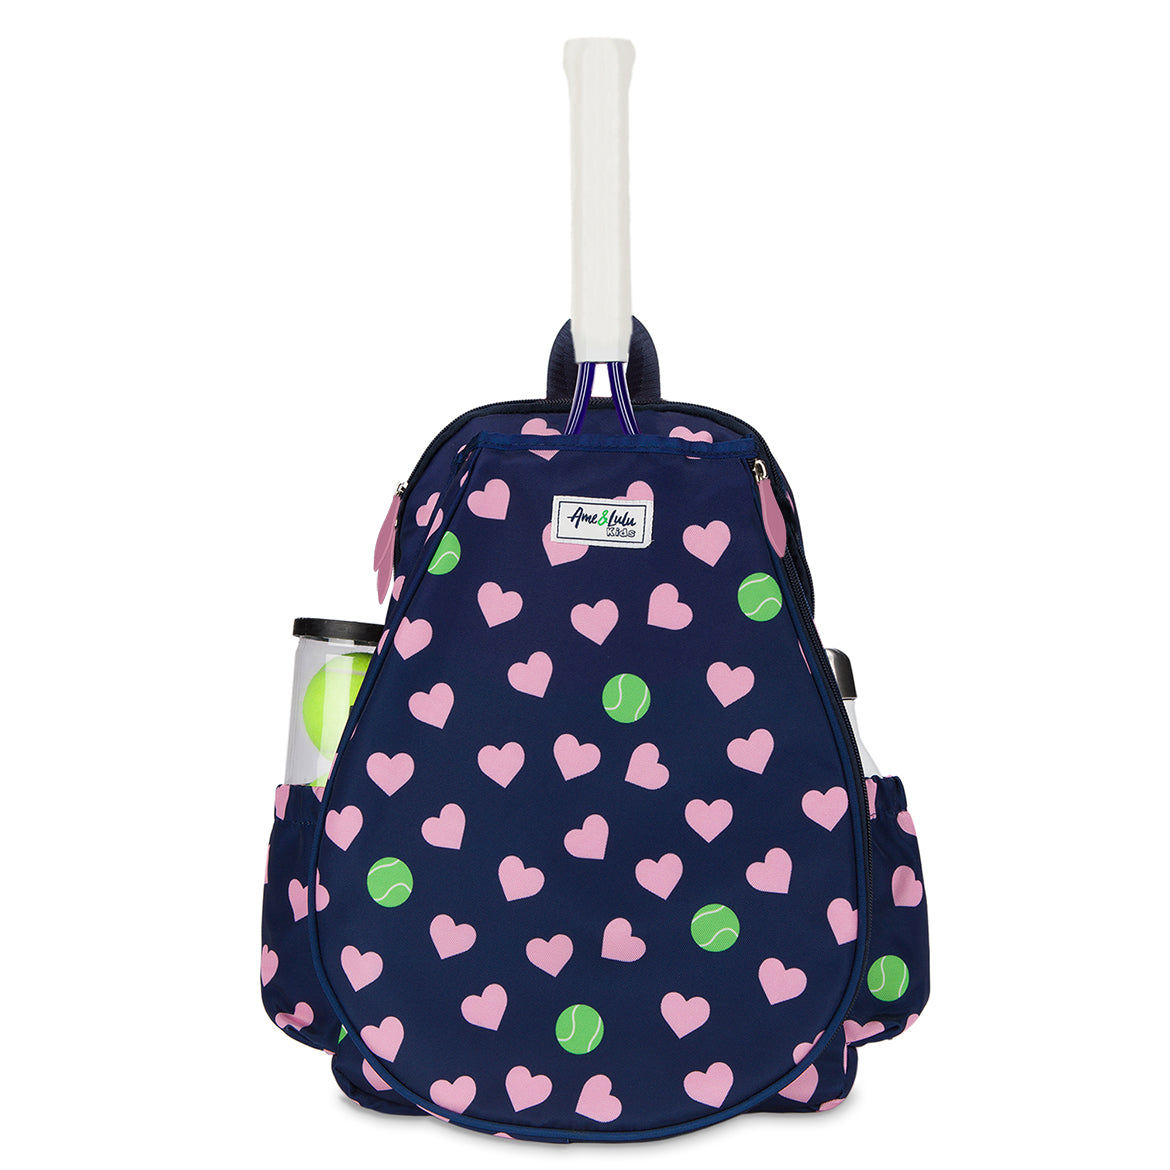 Front view of navy kids tennis backpack with pink hearts and green tennis ball pattern.